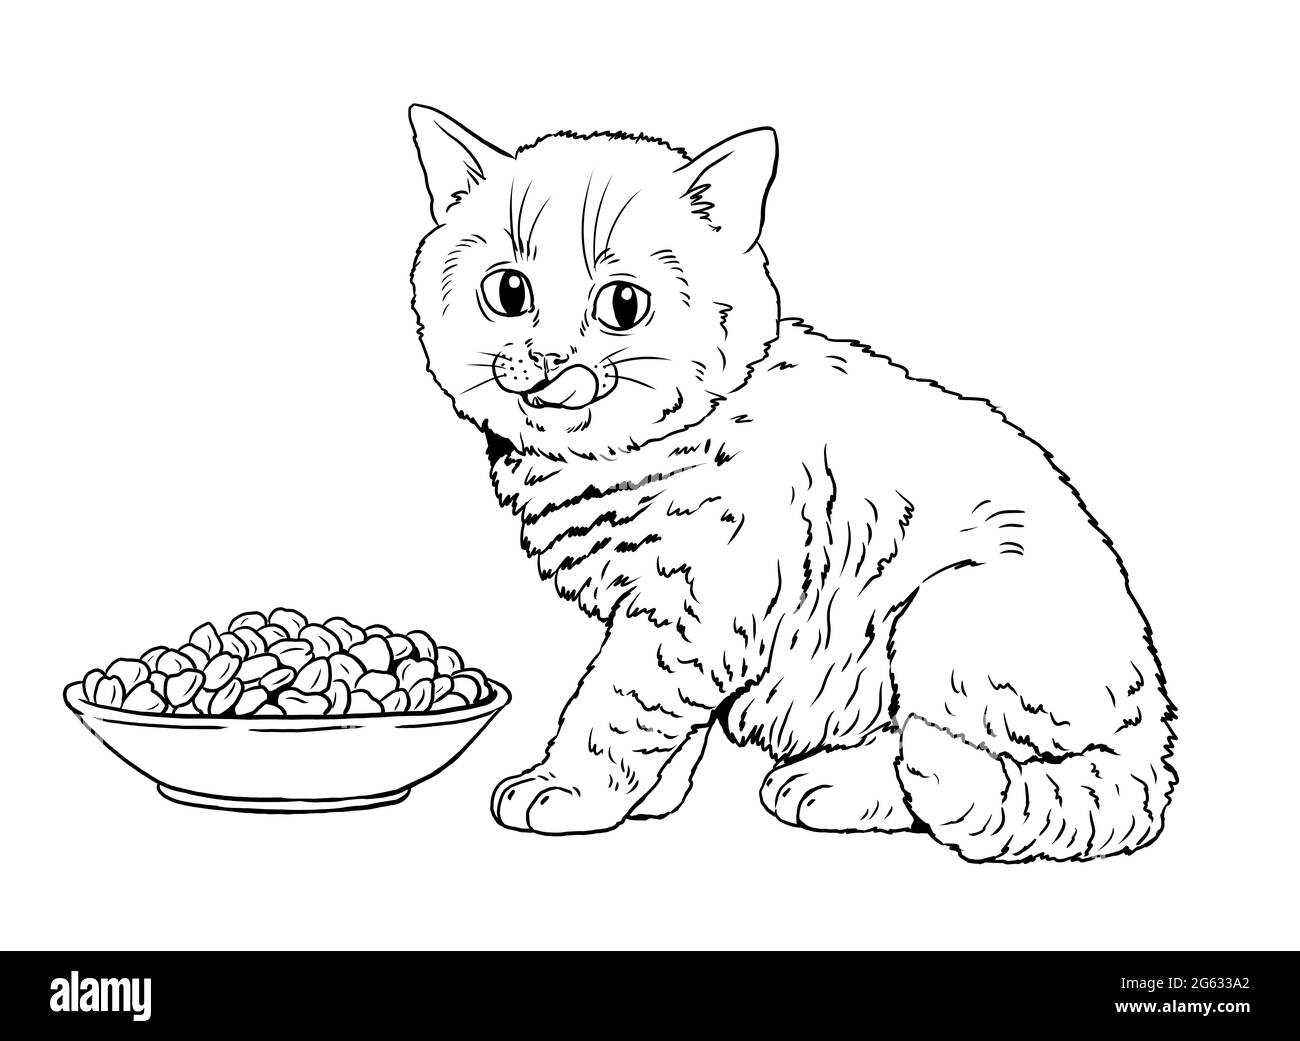 Cute kitten while eating. Template for a coloring book with little cats. Stock Photo